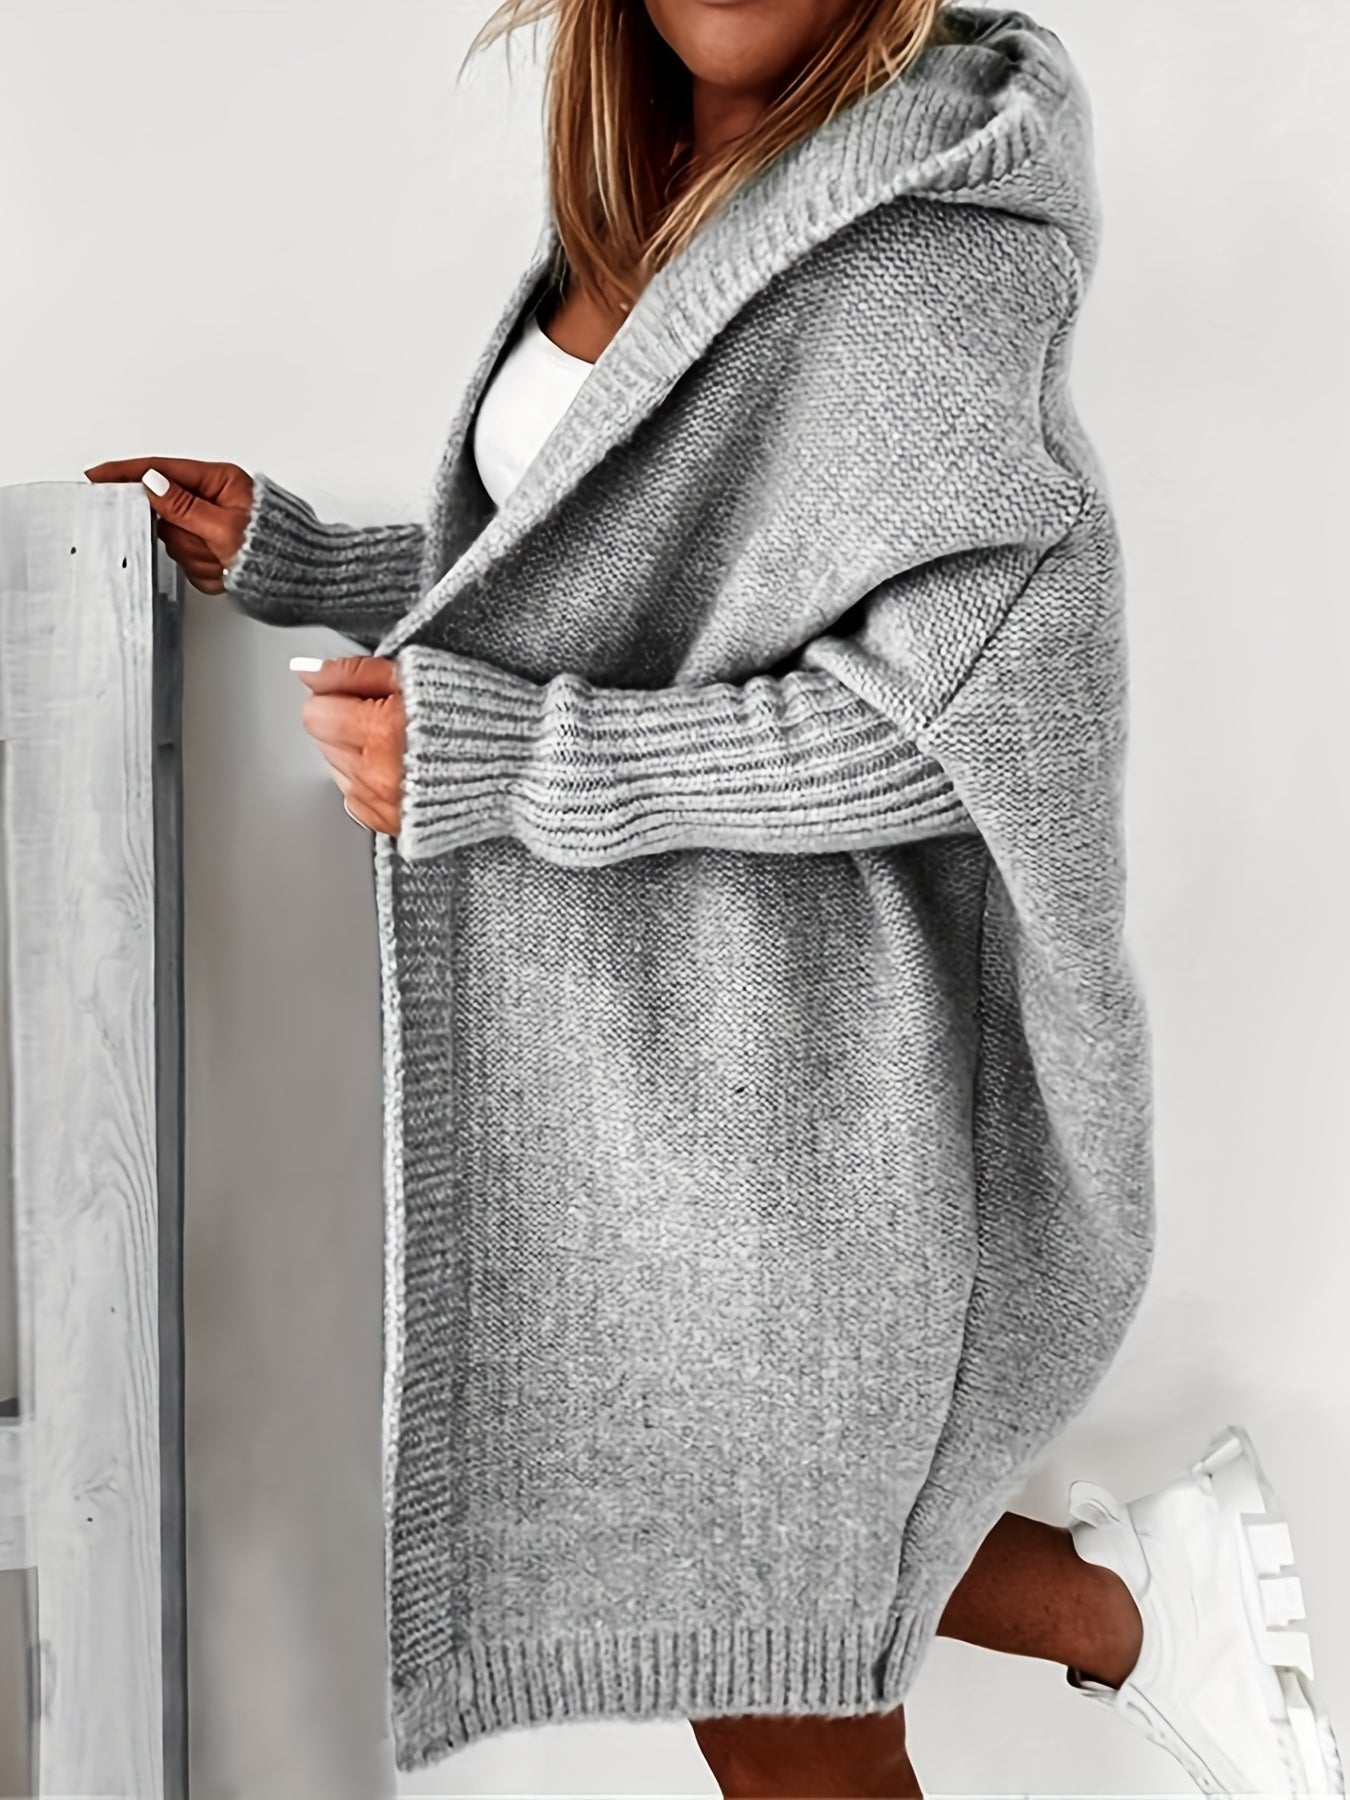 Vzyzv Oversized Hooded Knitted Cardigan, Long Sleeve Casual Sweater For Winter & Fall, Women's Clothing